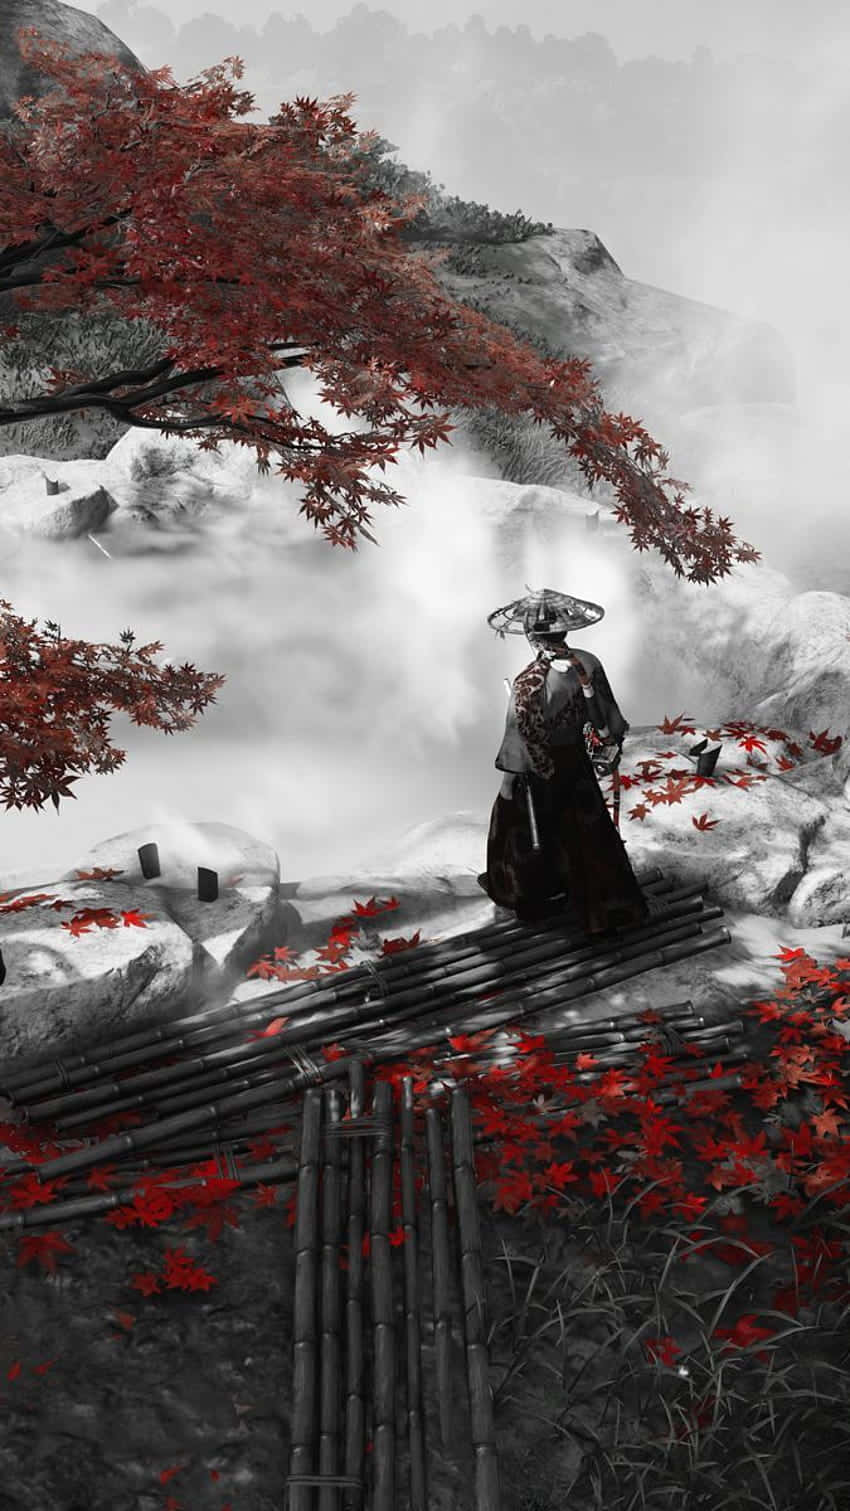 100+] Ghost Of Tsushima Iphone Wallpapers